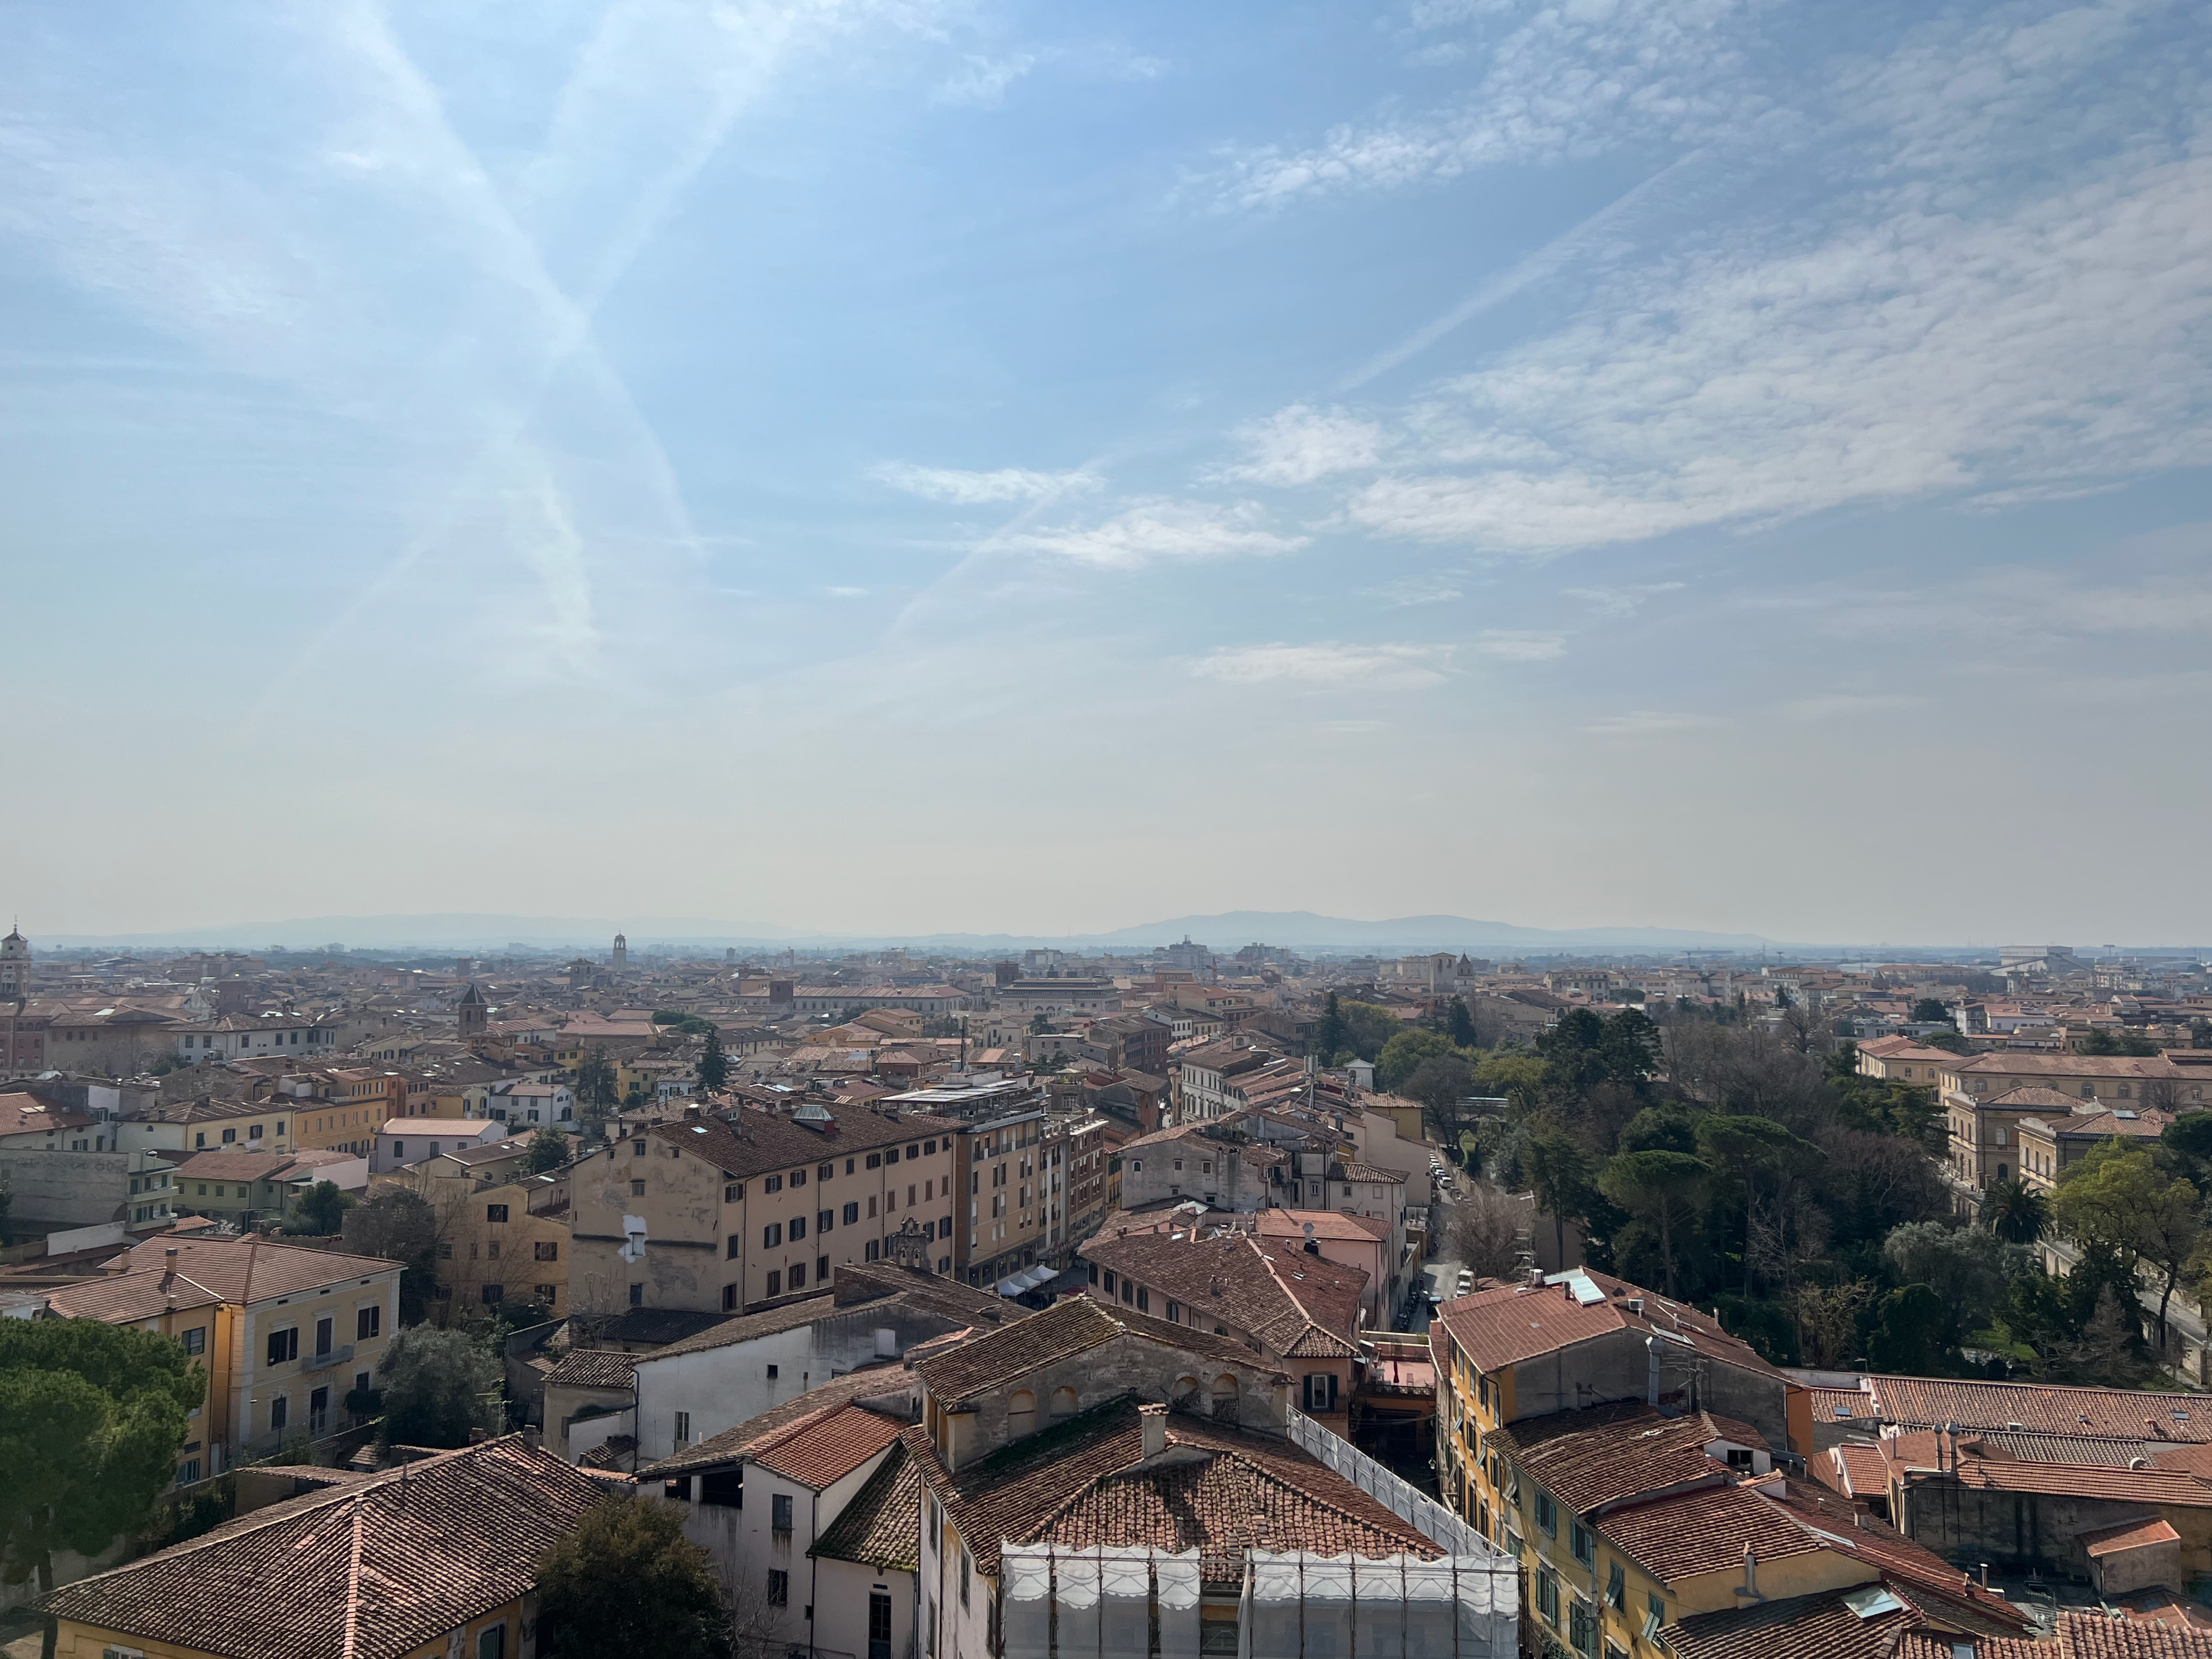 View of Pisa from the Leaning Tower of Pisa